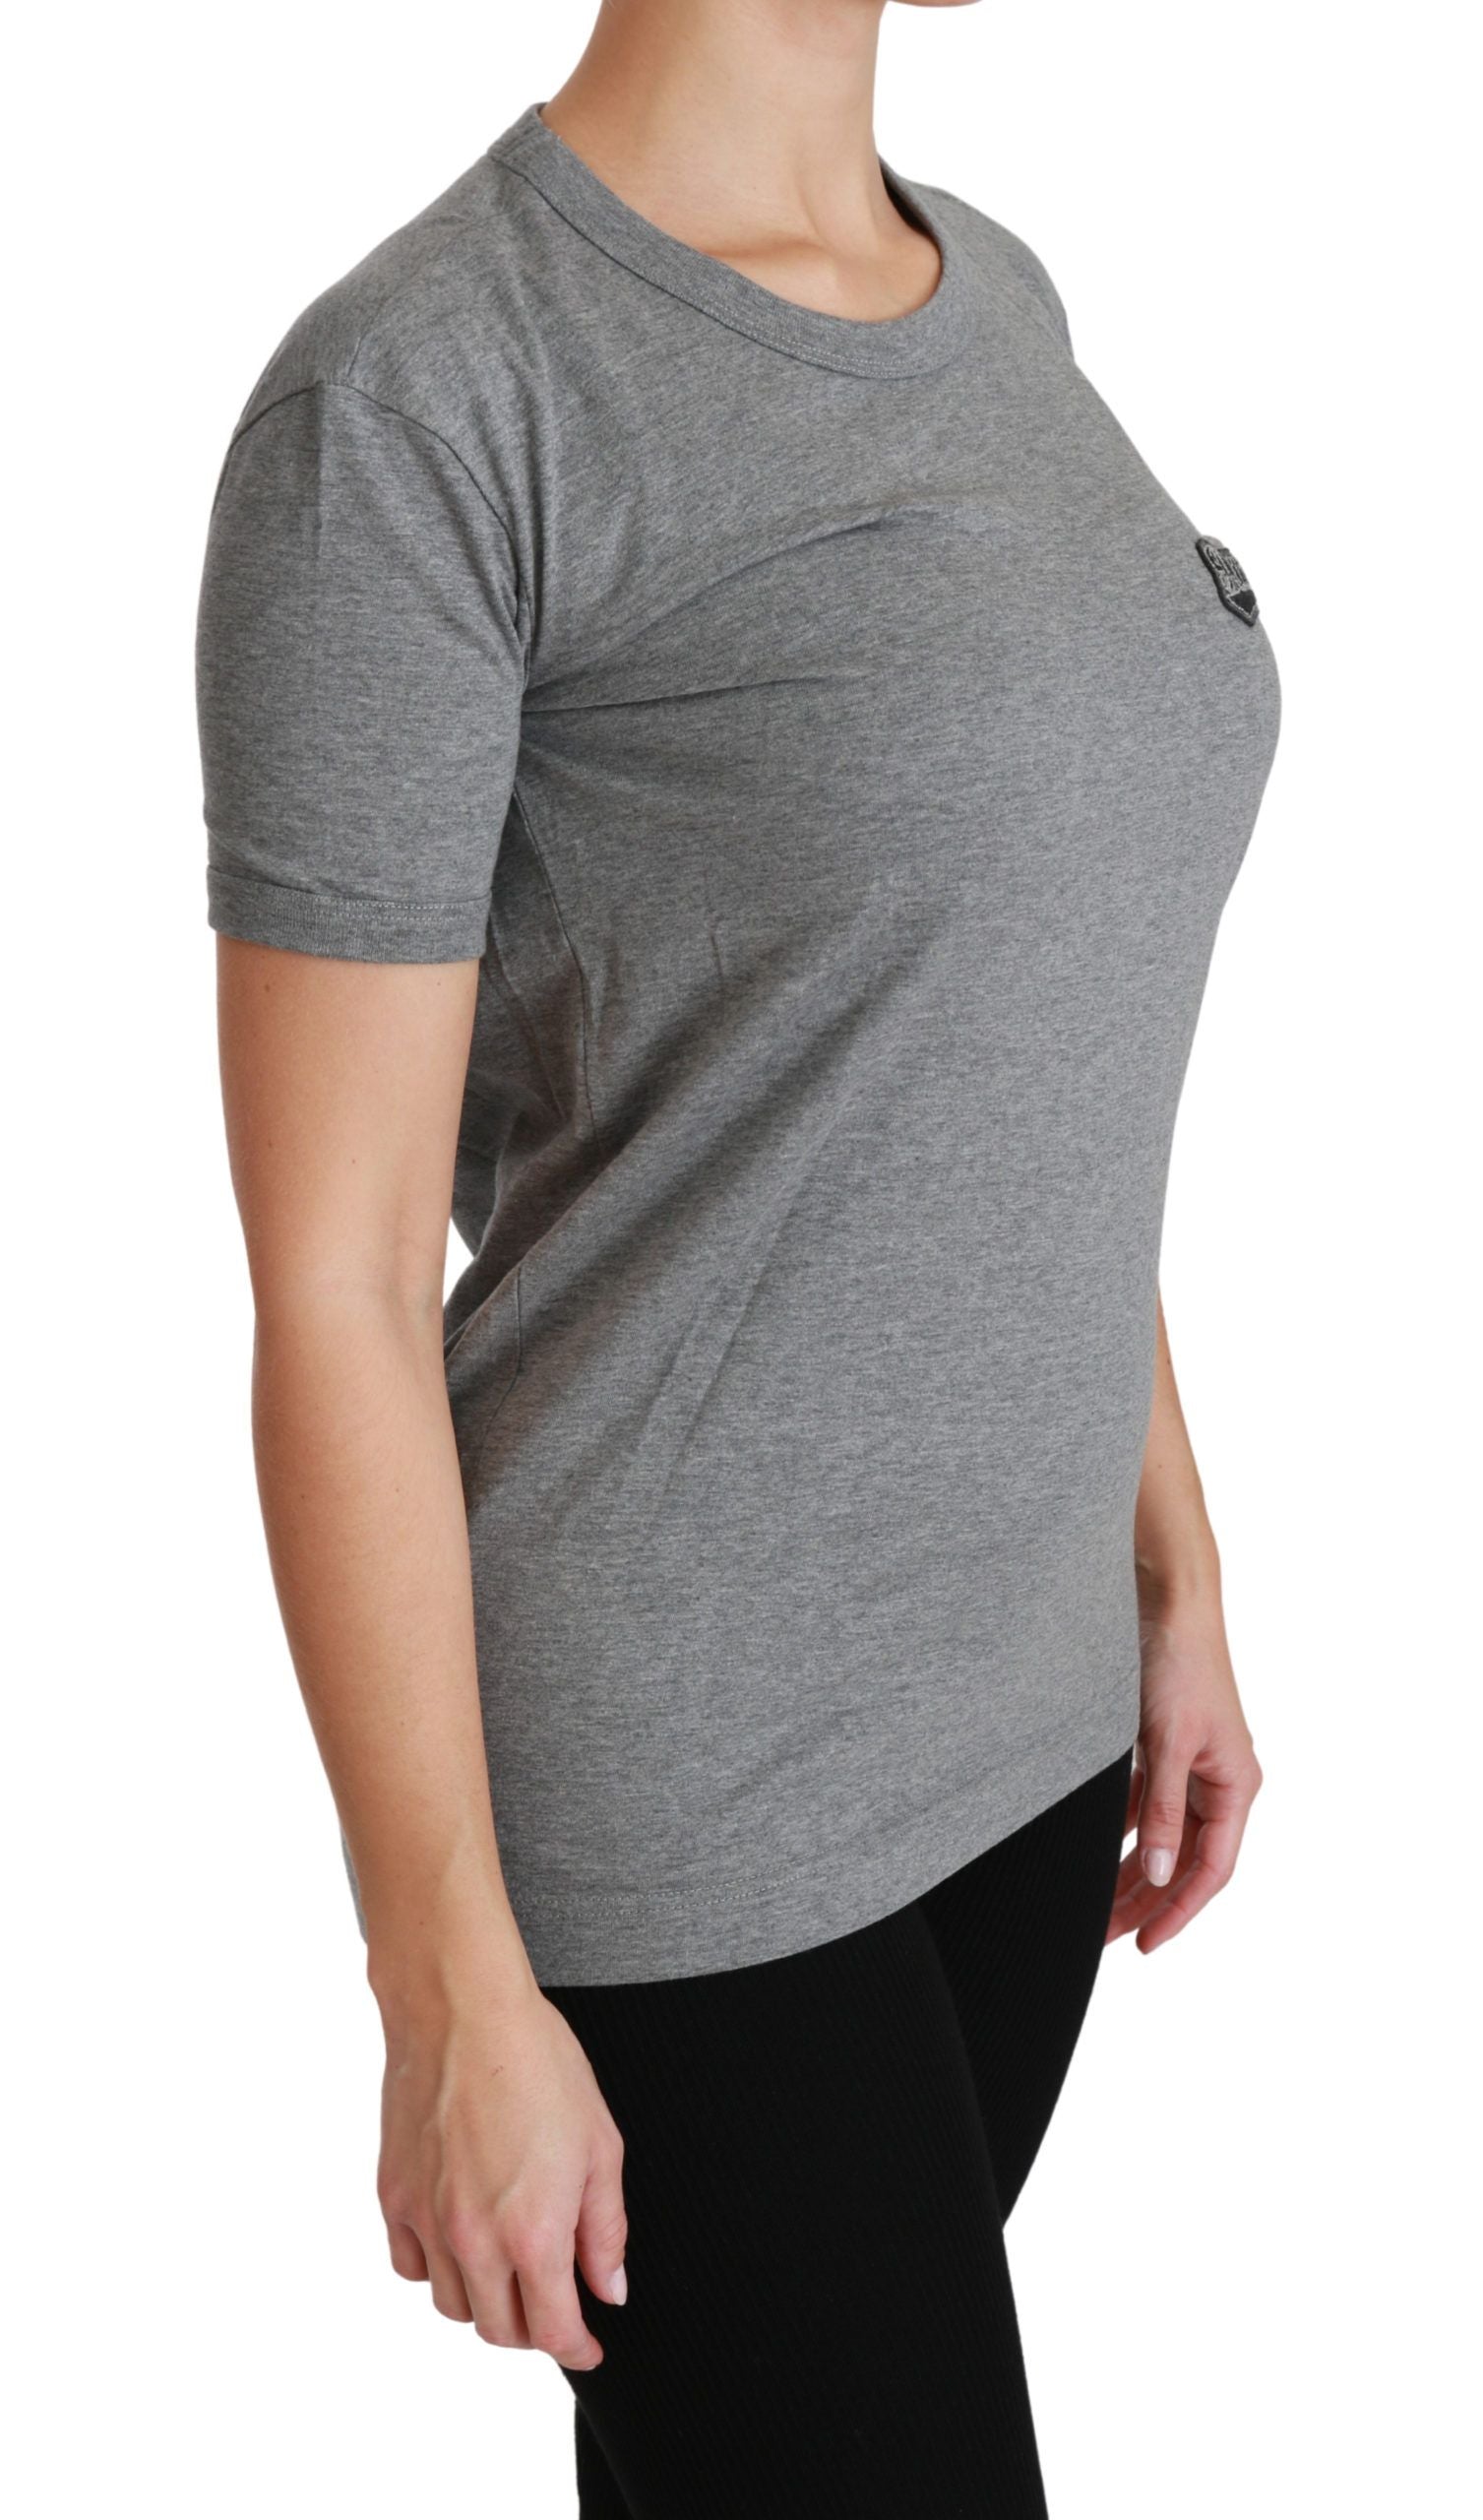 Chic Gray Amore Patch Crewneck Tee